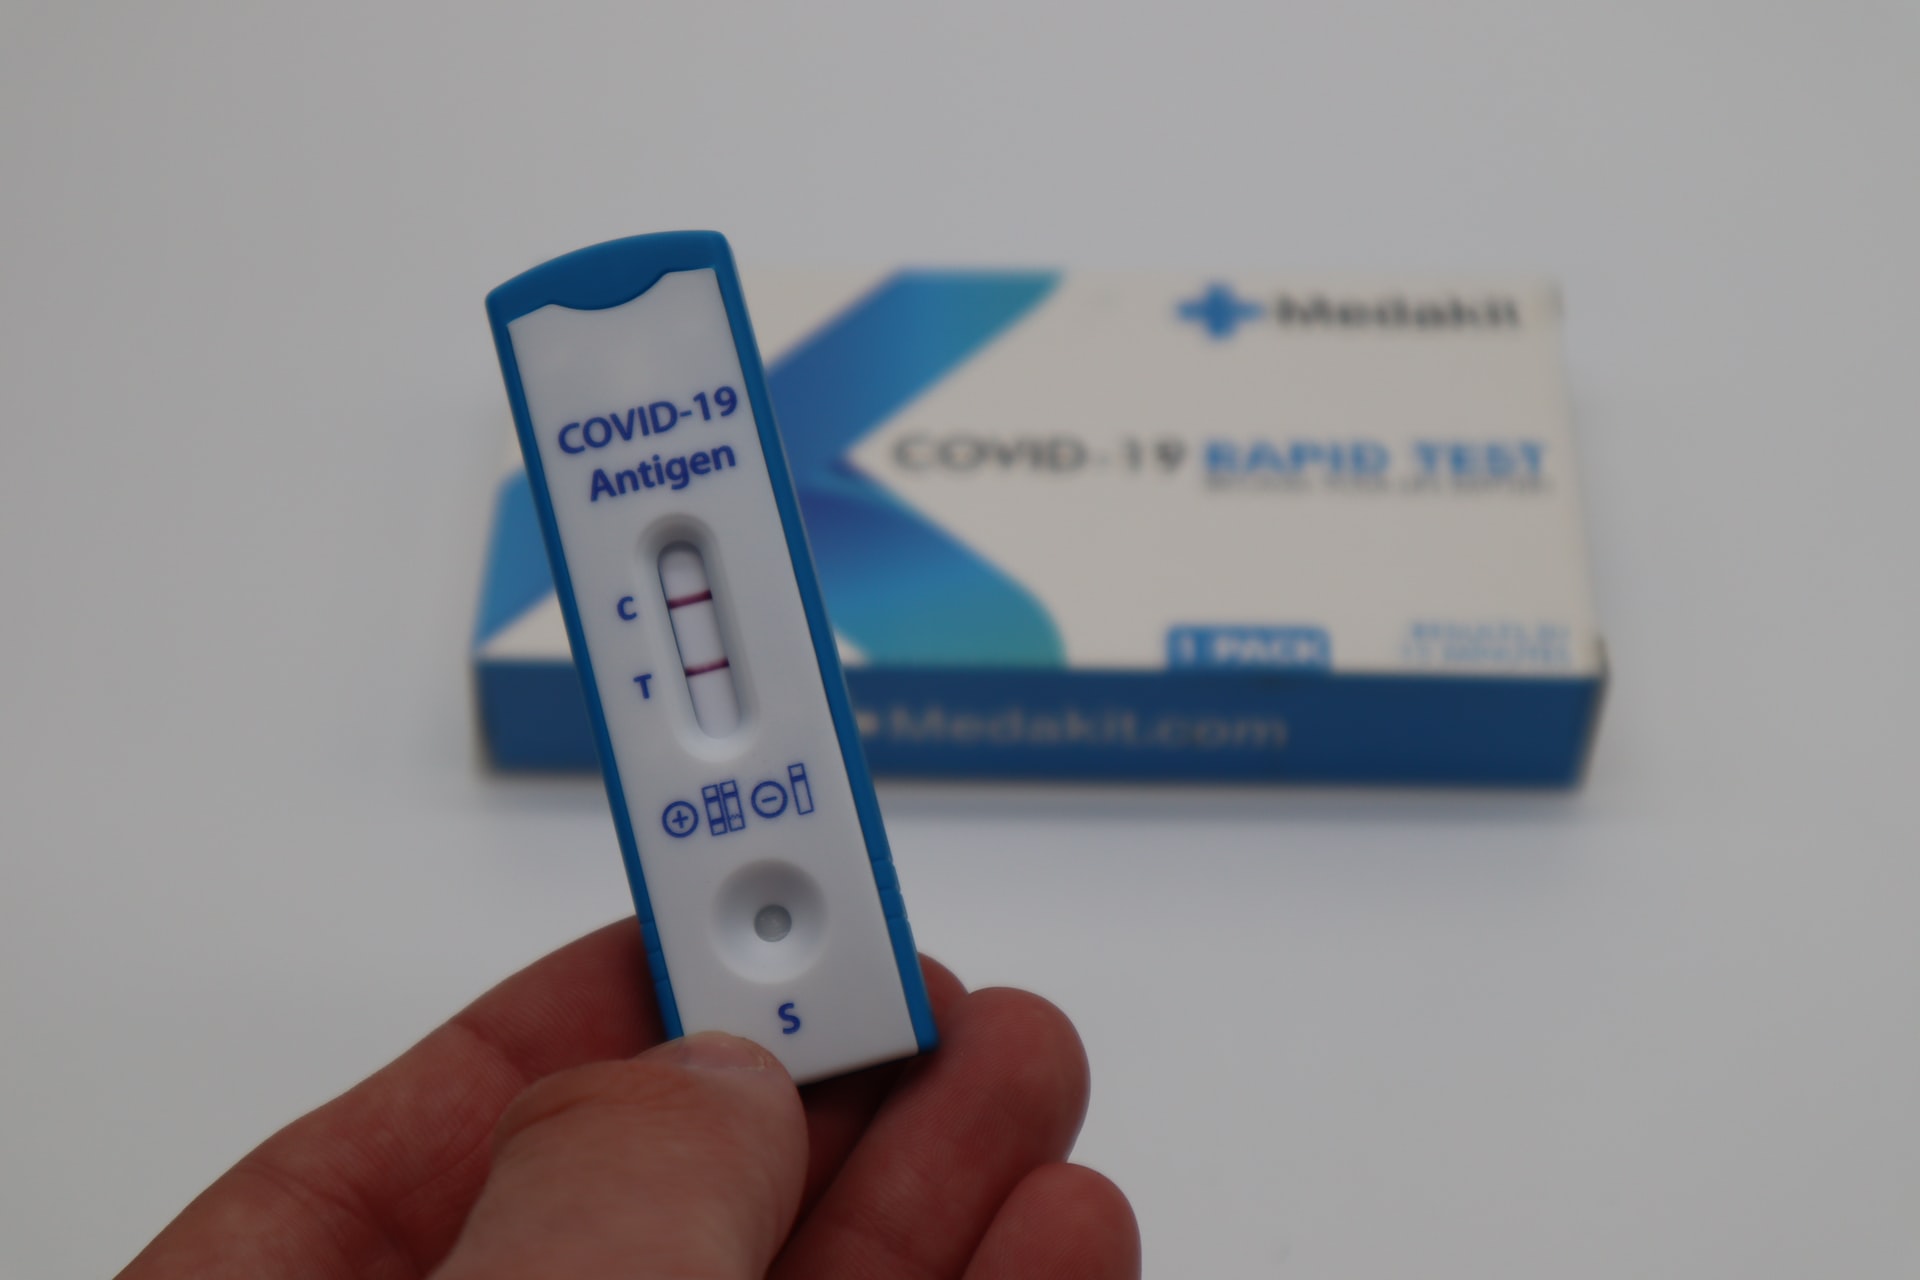 Should vaccinated people still get COVID tests?